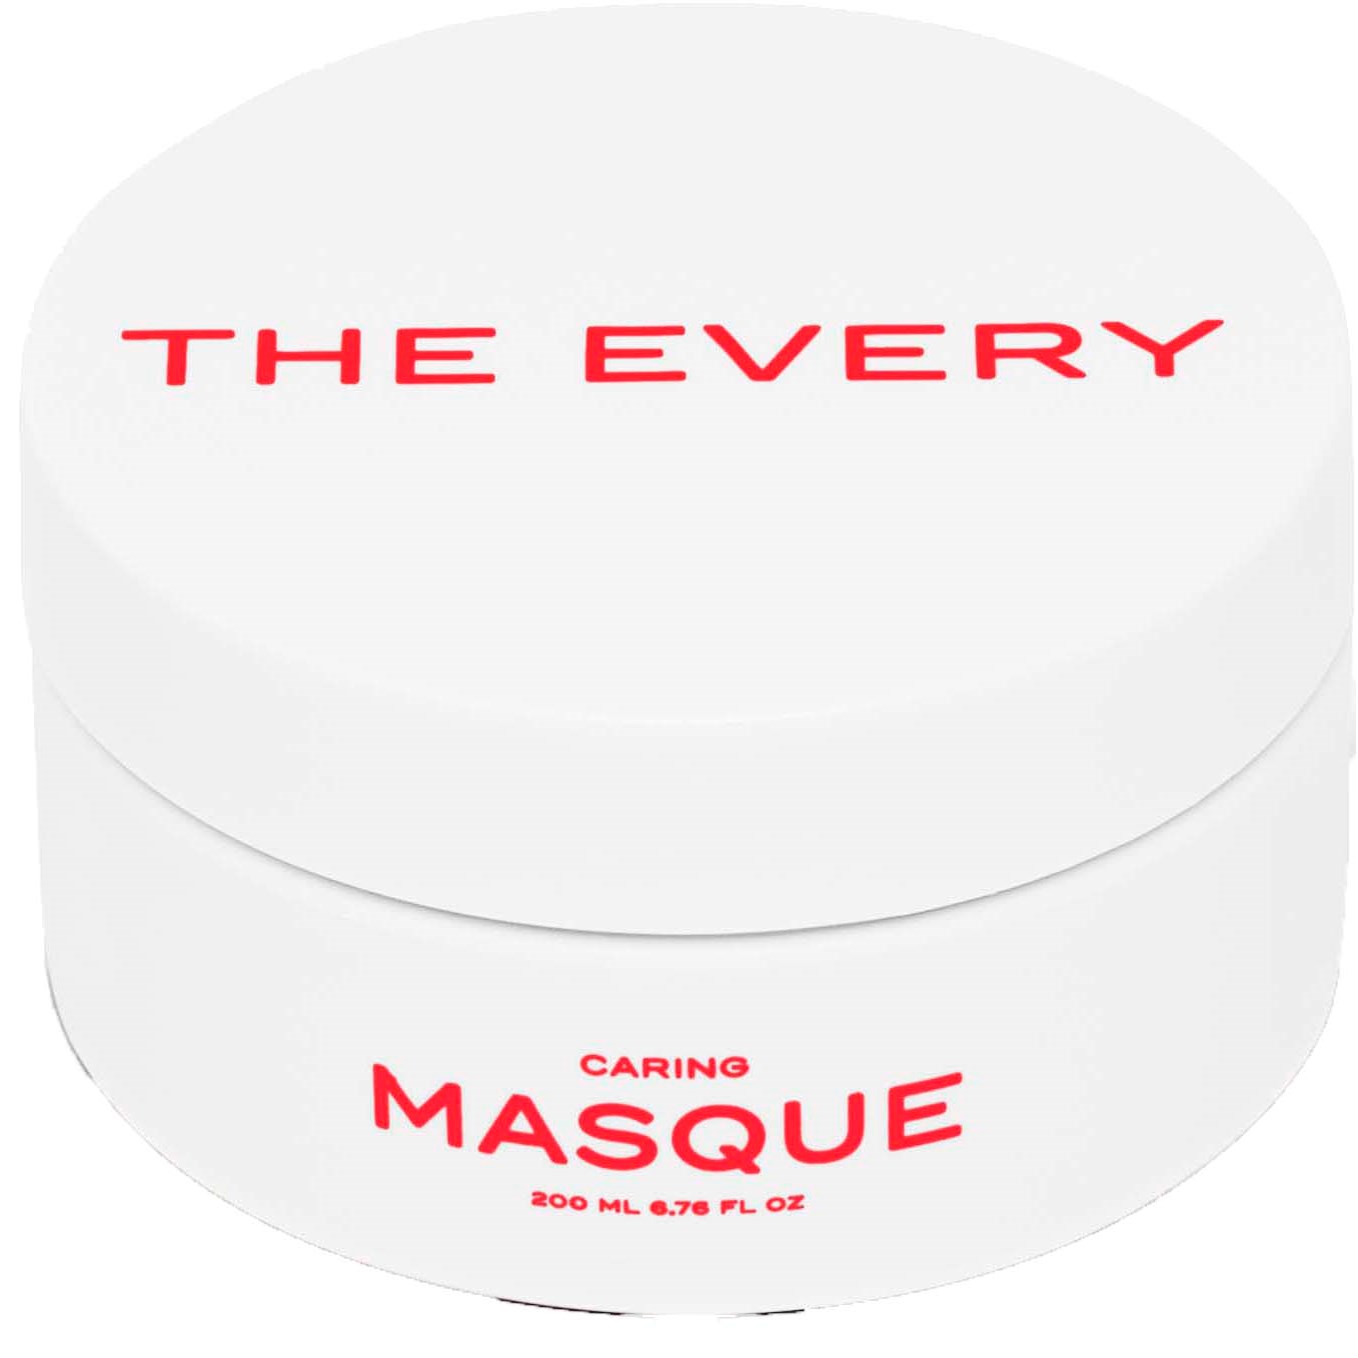 The Every Caring Masque 200 ml